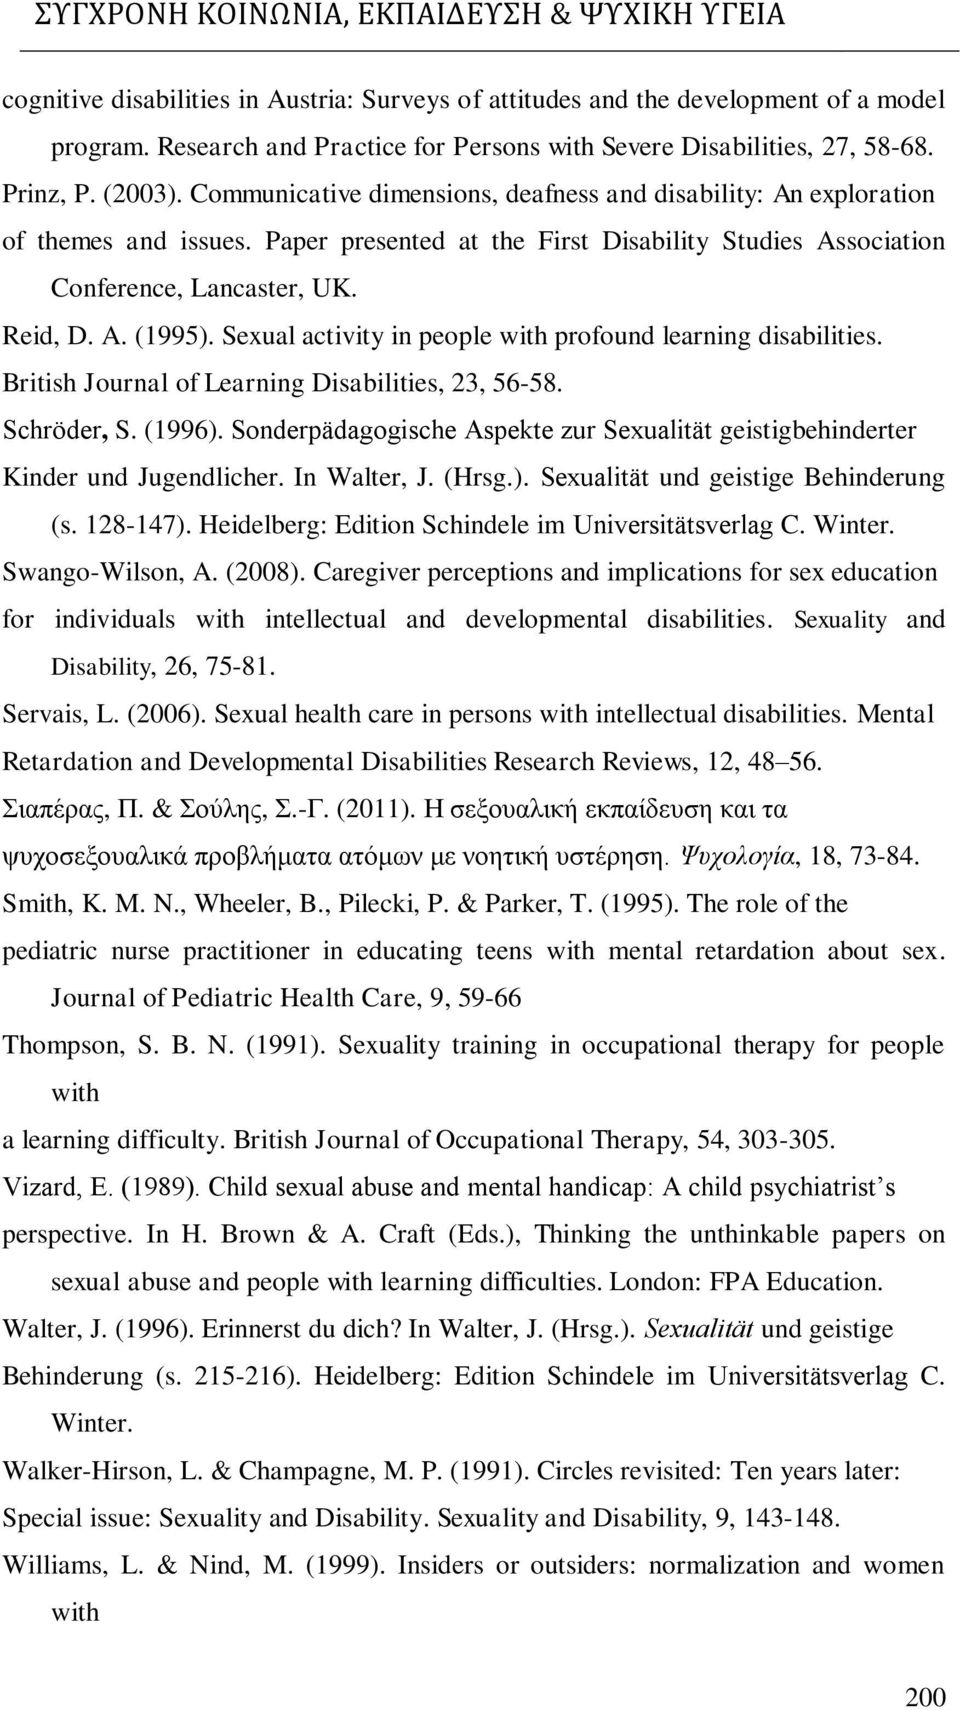 Sexual activity in people with profound learning disabilities. British Journal of Learning Disabilities, 23, 56-58. Schröder, S. (1996).